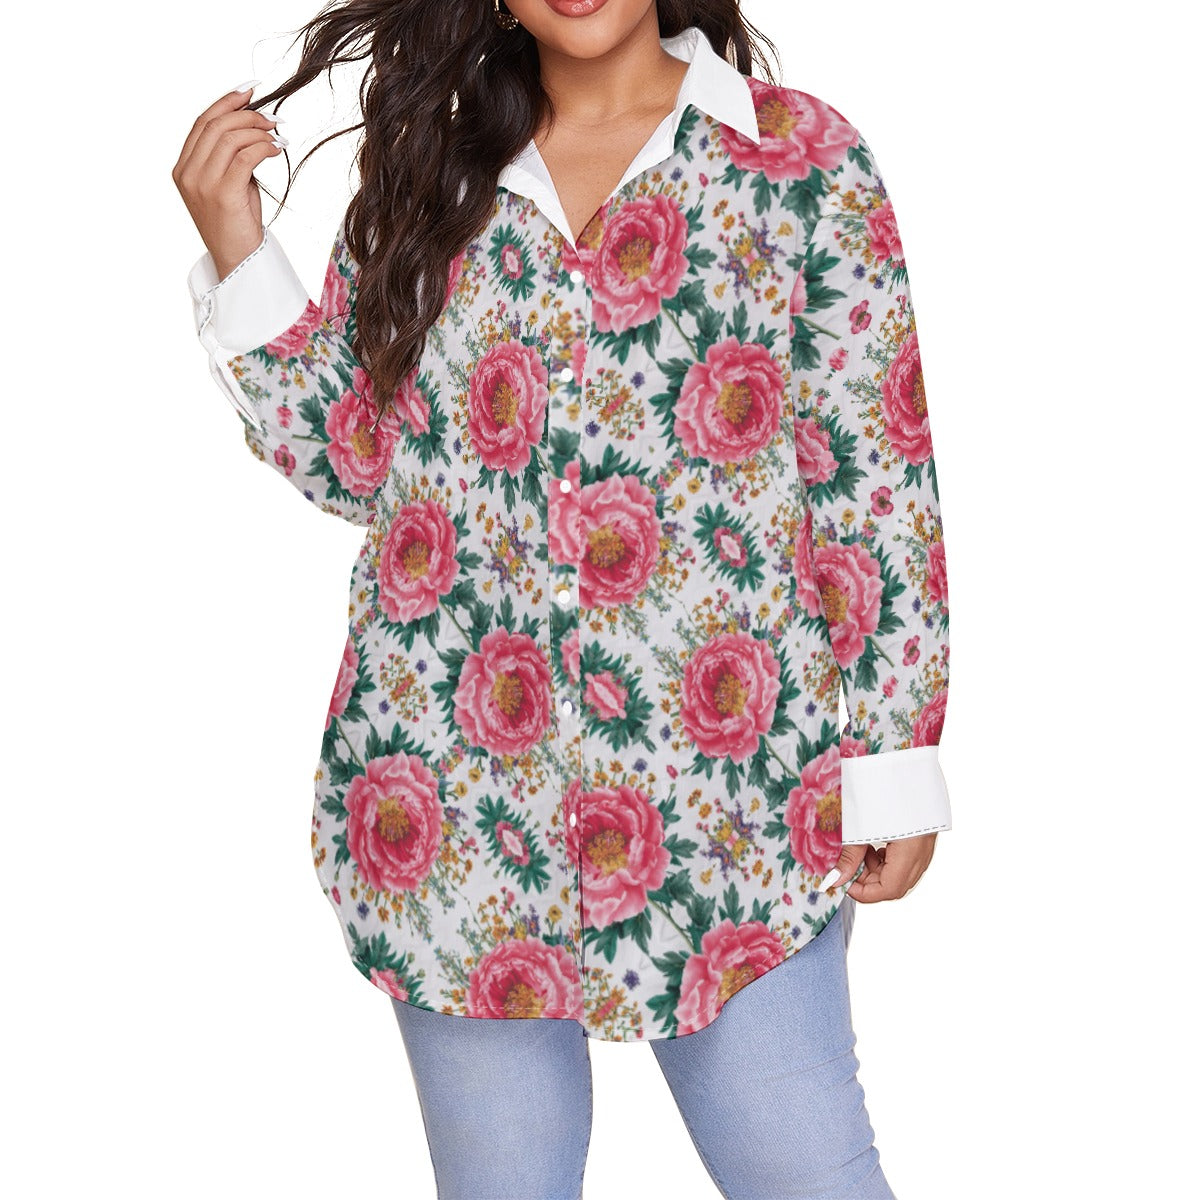 Hot Pink Peony on Bias - Women's Shirt With Long Sleeve(Plus Size)